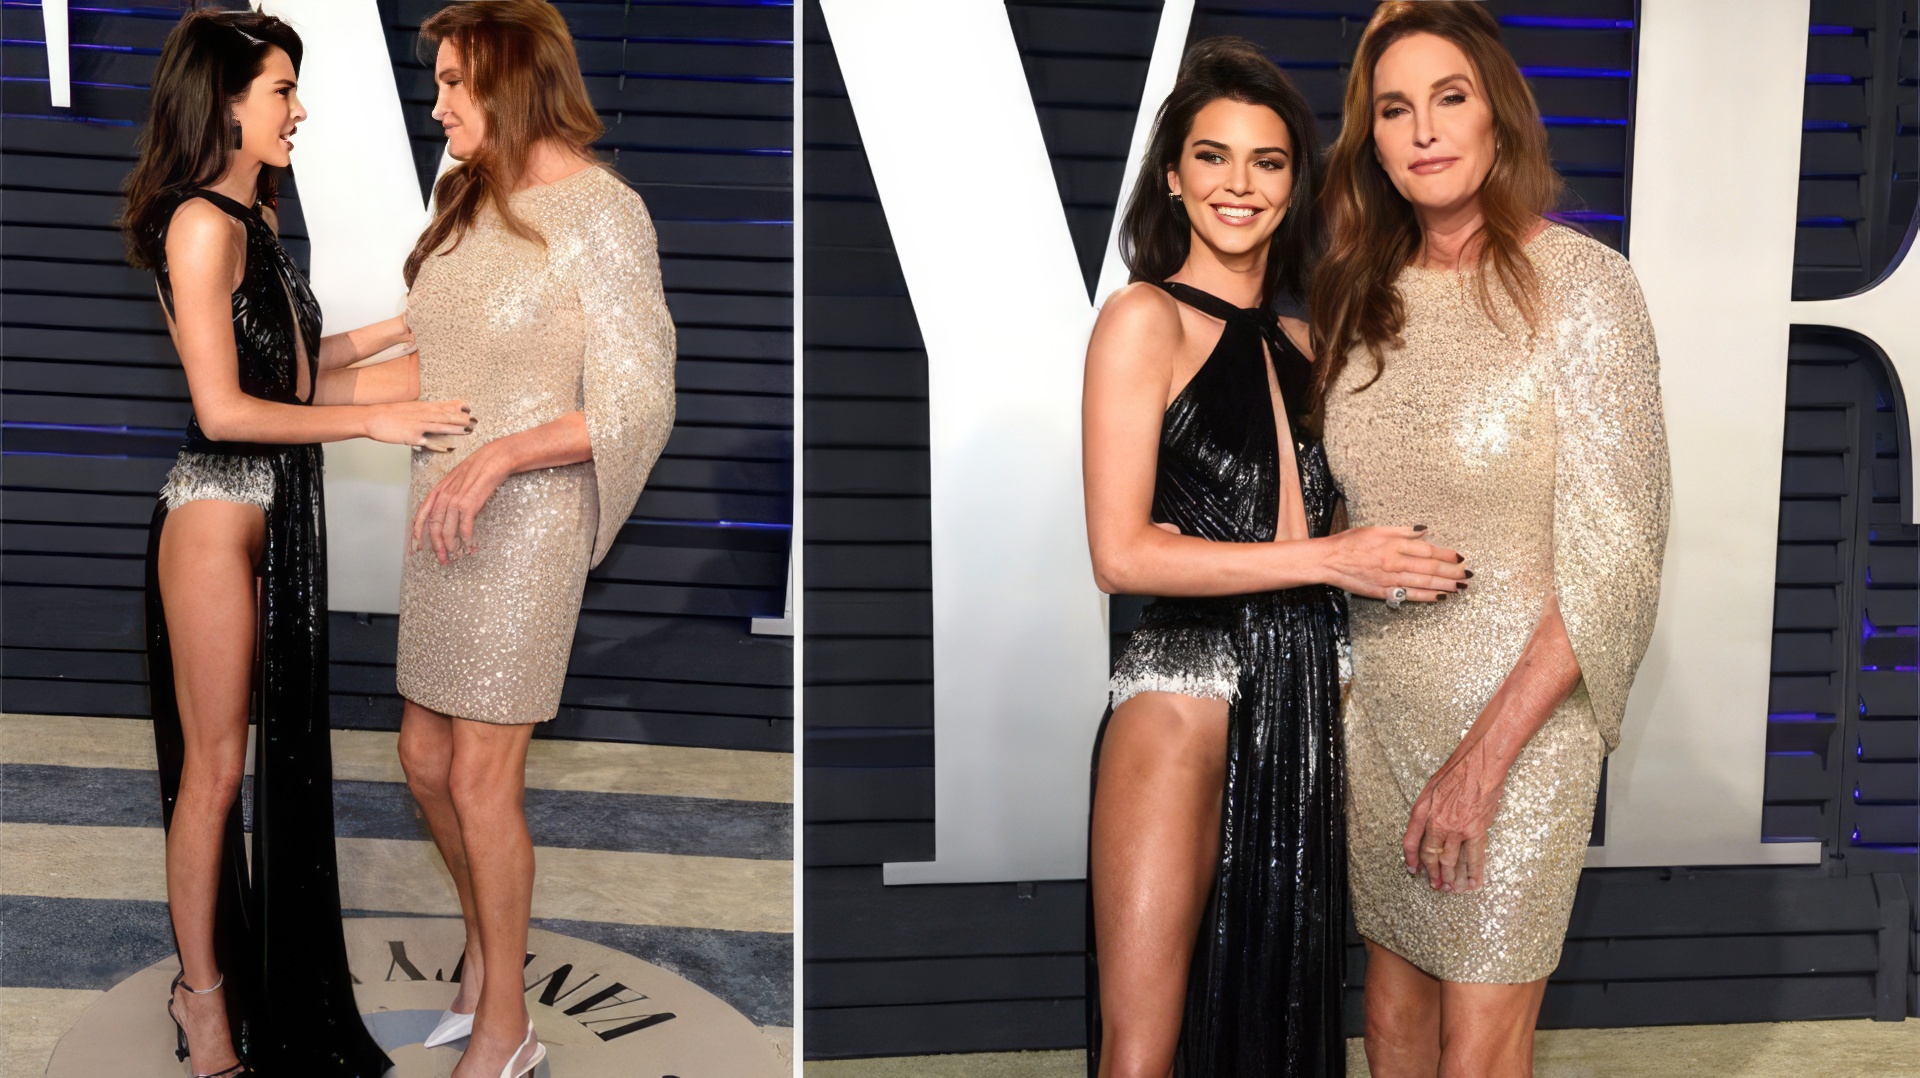 Caitlyn Jenner and her daughter at the Academy Awards